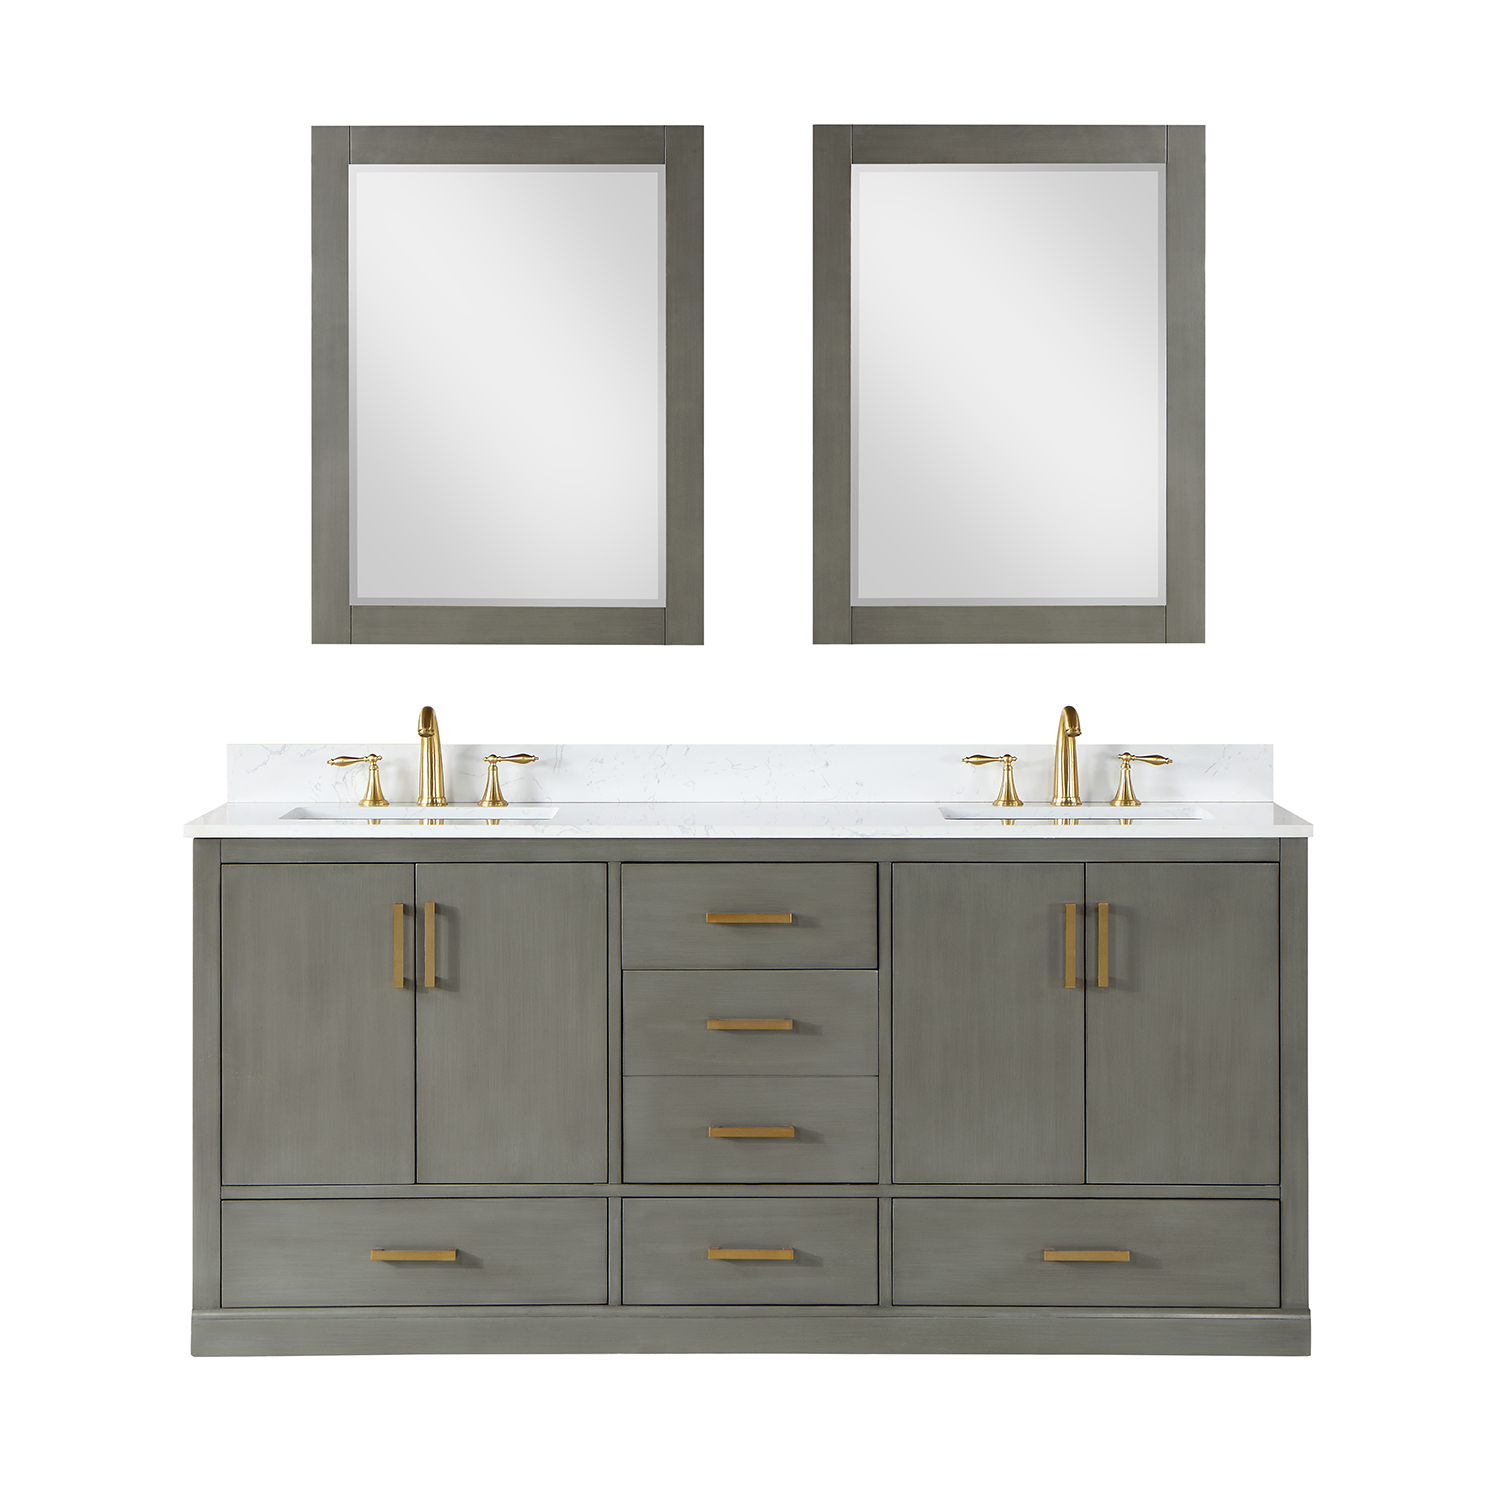 Issac Edwards Collection 72" Double Bathroom Vanity Set in Gray Pine with Carrara White Composite Stone Countertop without Mirror 